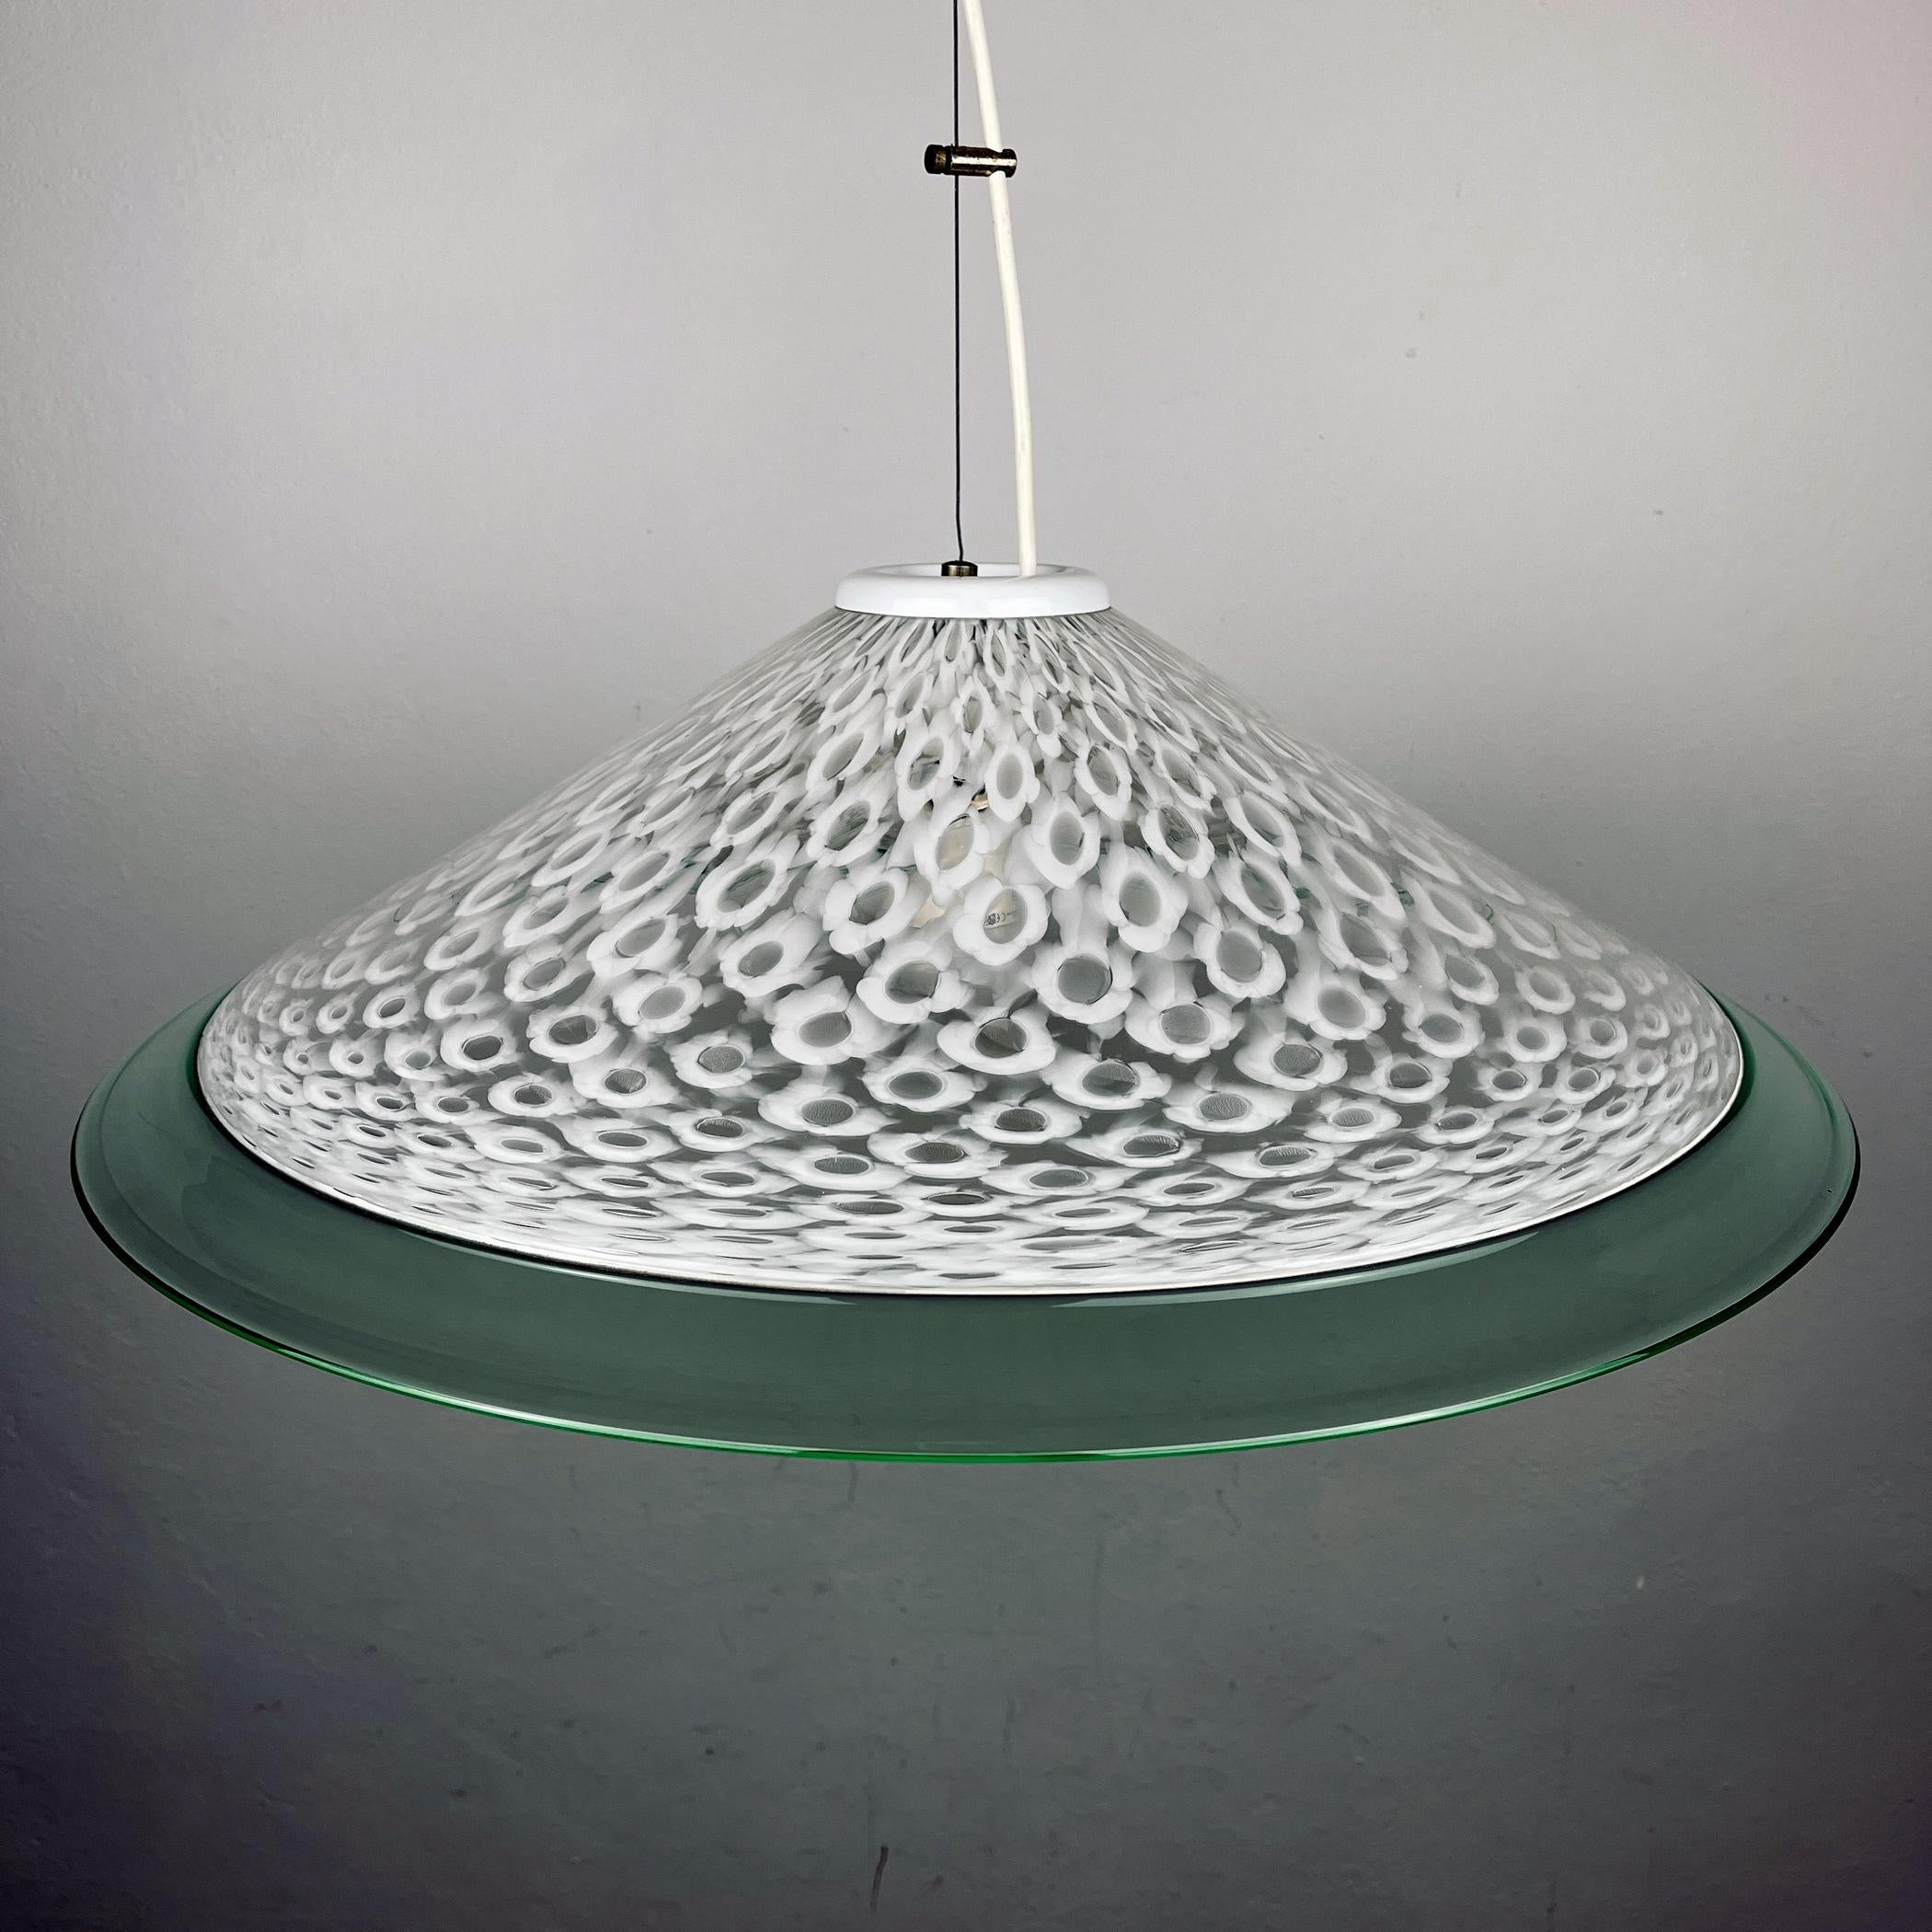 The stylish and elegant, this milky white and green Murano glass pendant lamp is a classic example of 70s Italian lighting. Made in Italy.
In excellent vintage condition. No chips or cracks. Maximum height with cable 95 cm. E27 bulb required. Lamp